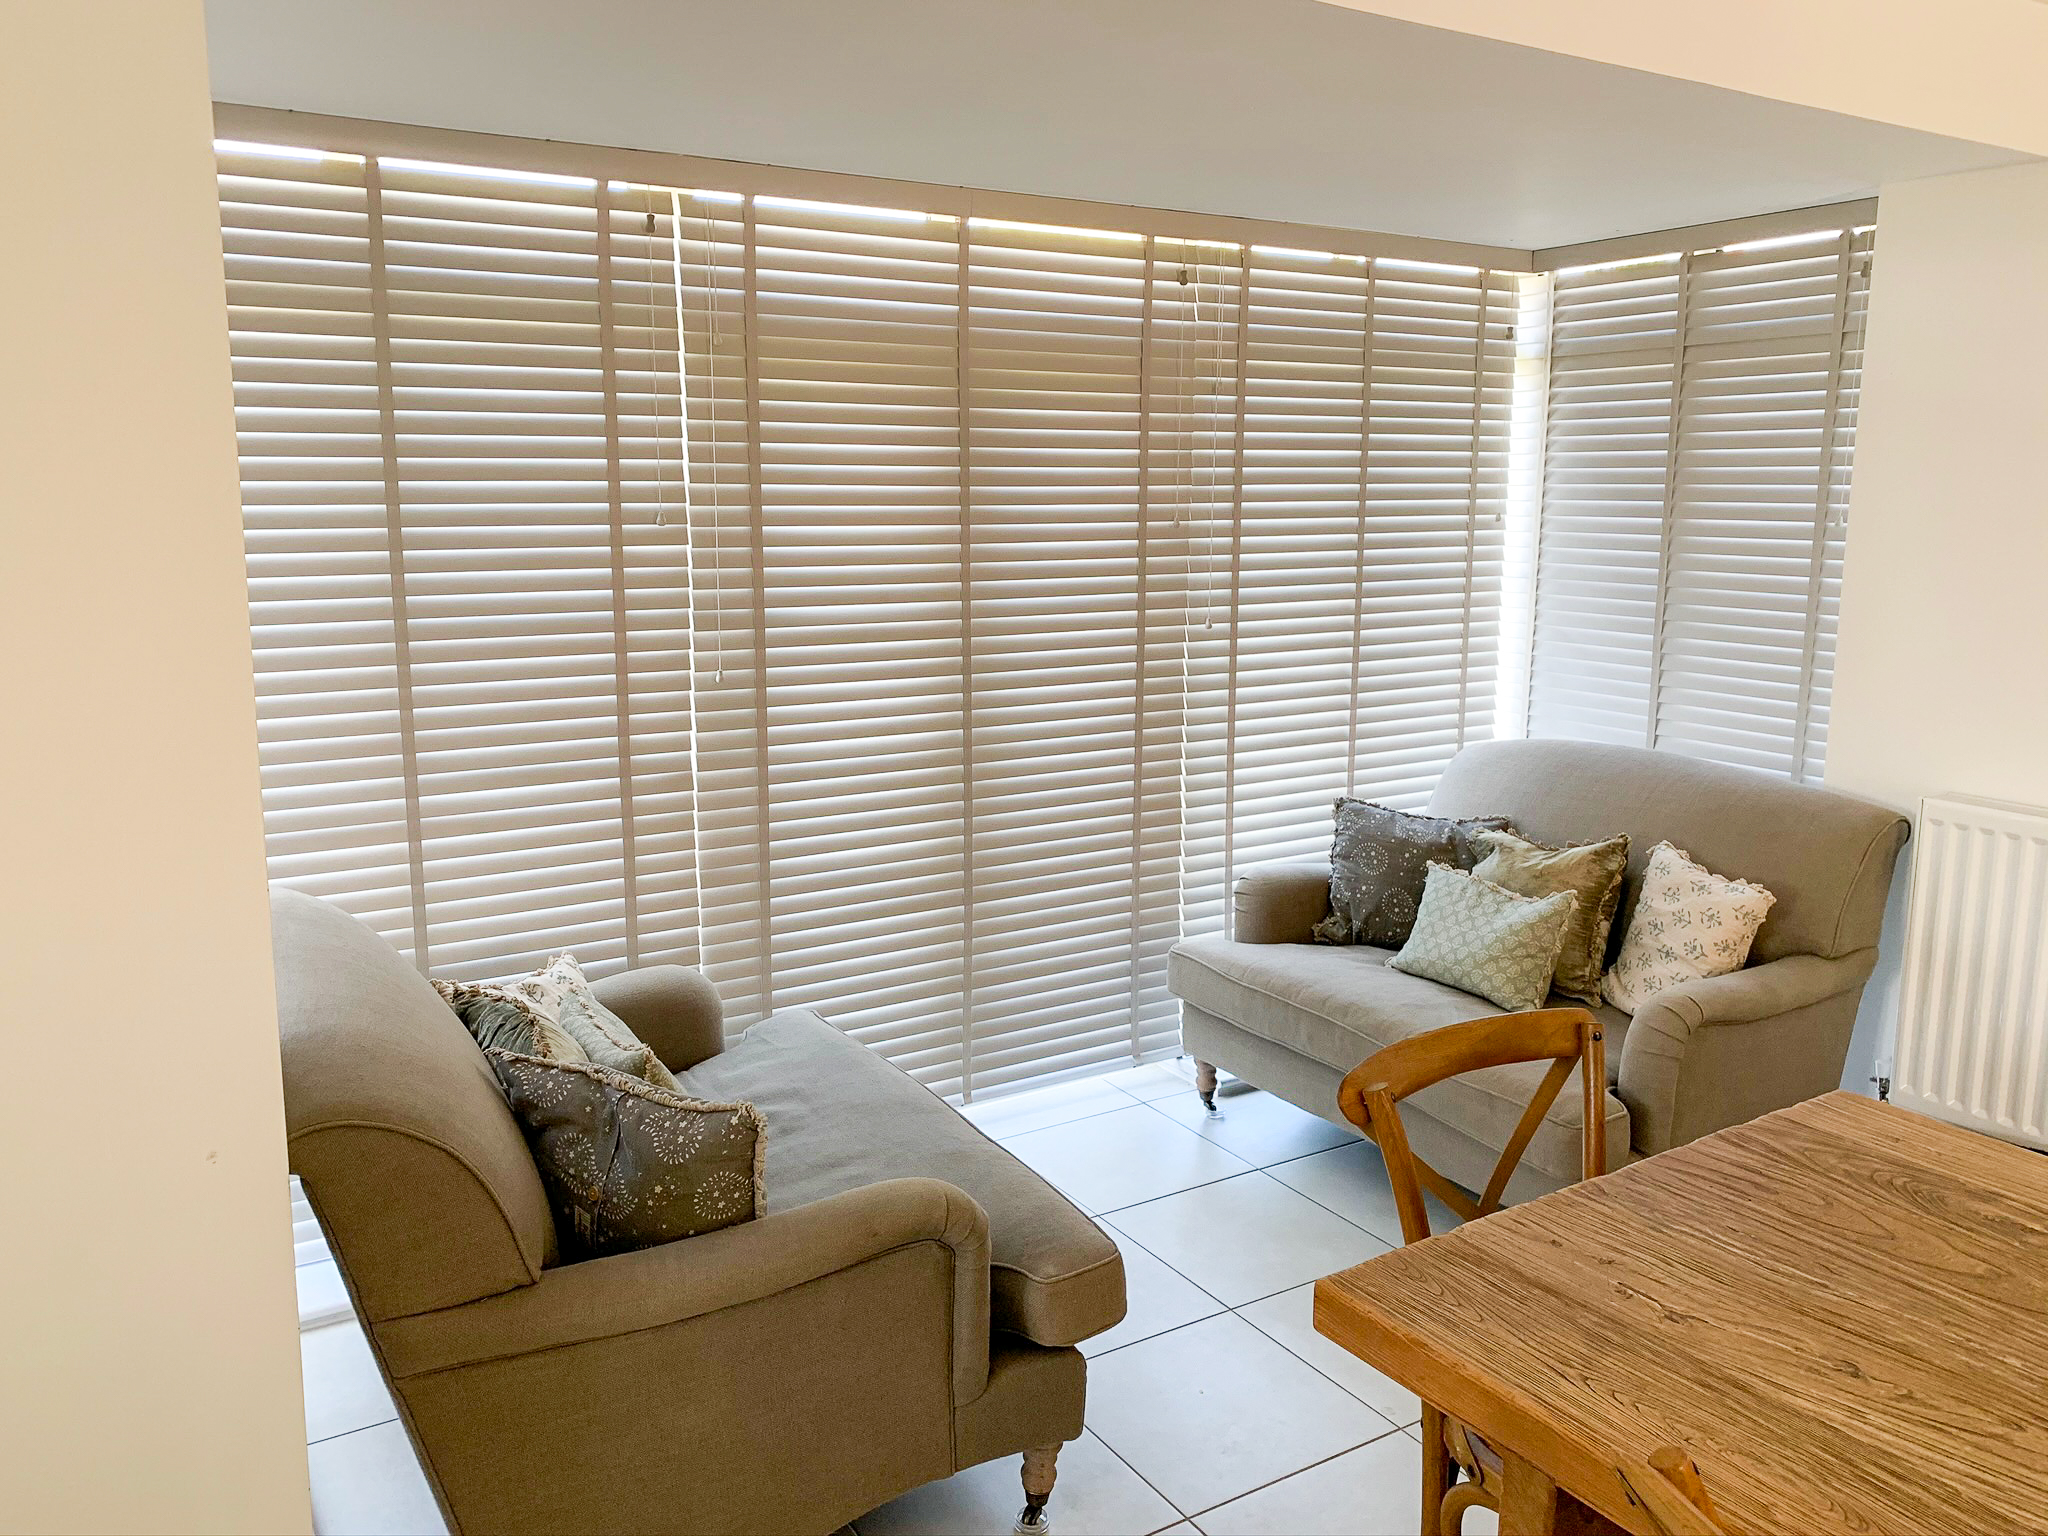 Hard Wood Venetian blinds in a dining room